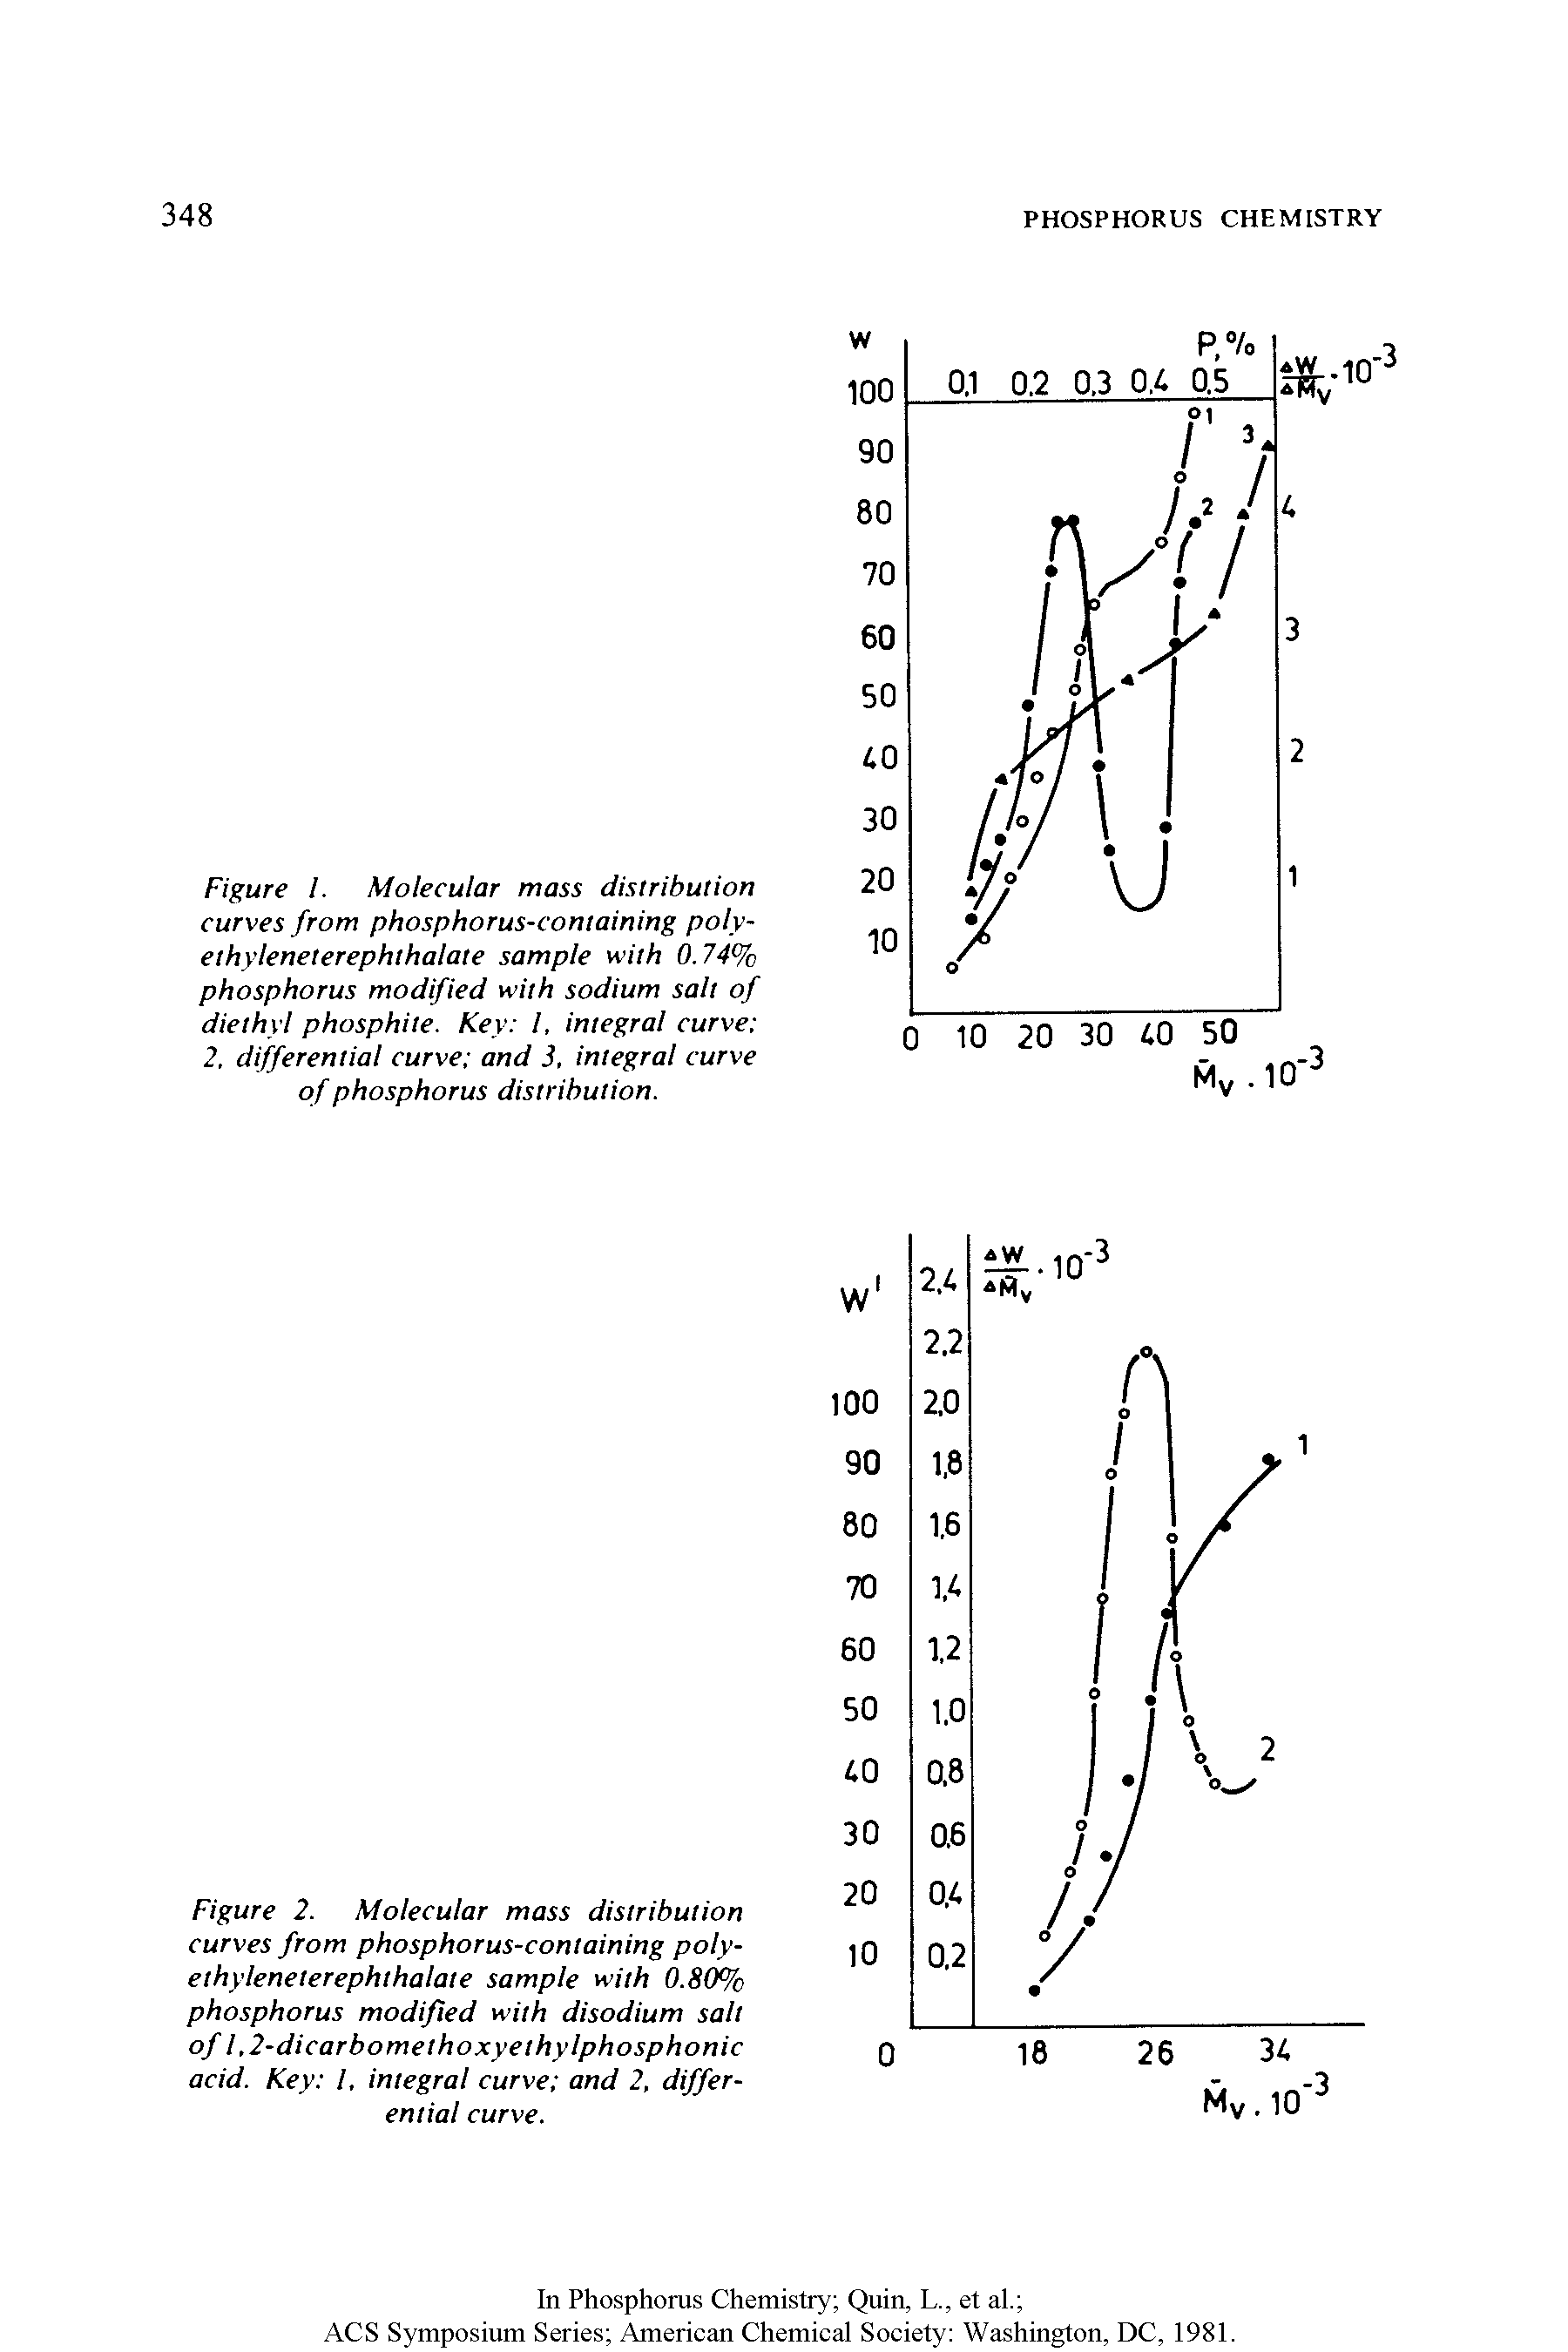 Figure I. Molecular mass distribution curves from phosphorus-containing poly-ethyleneterephlhalate sample with 0.74% phosphorus modified with sodium salt of diethyl phosphite. Key l, integral curve 2. differential curve and 3, integral curve of phosphorus distribution.